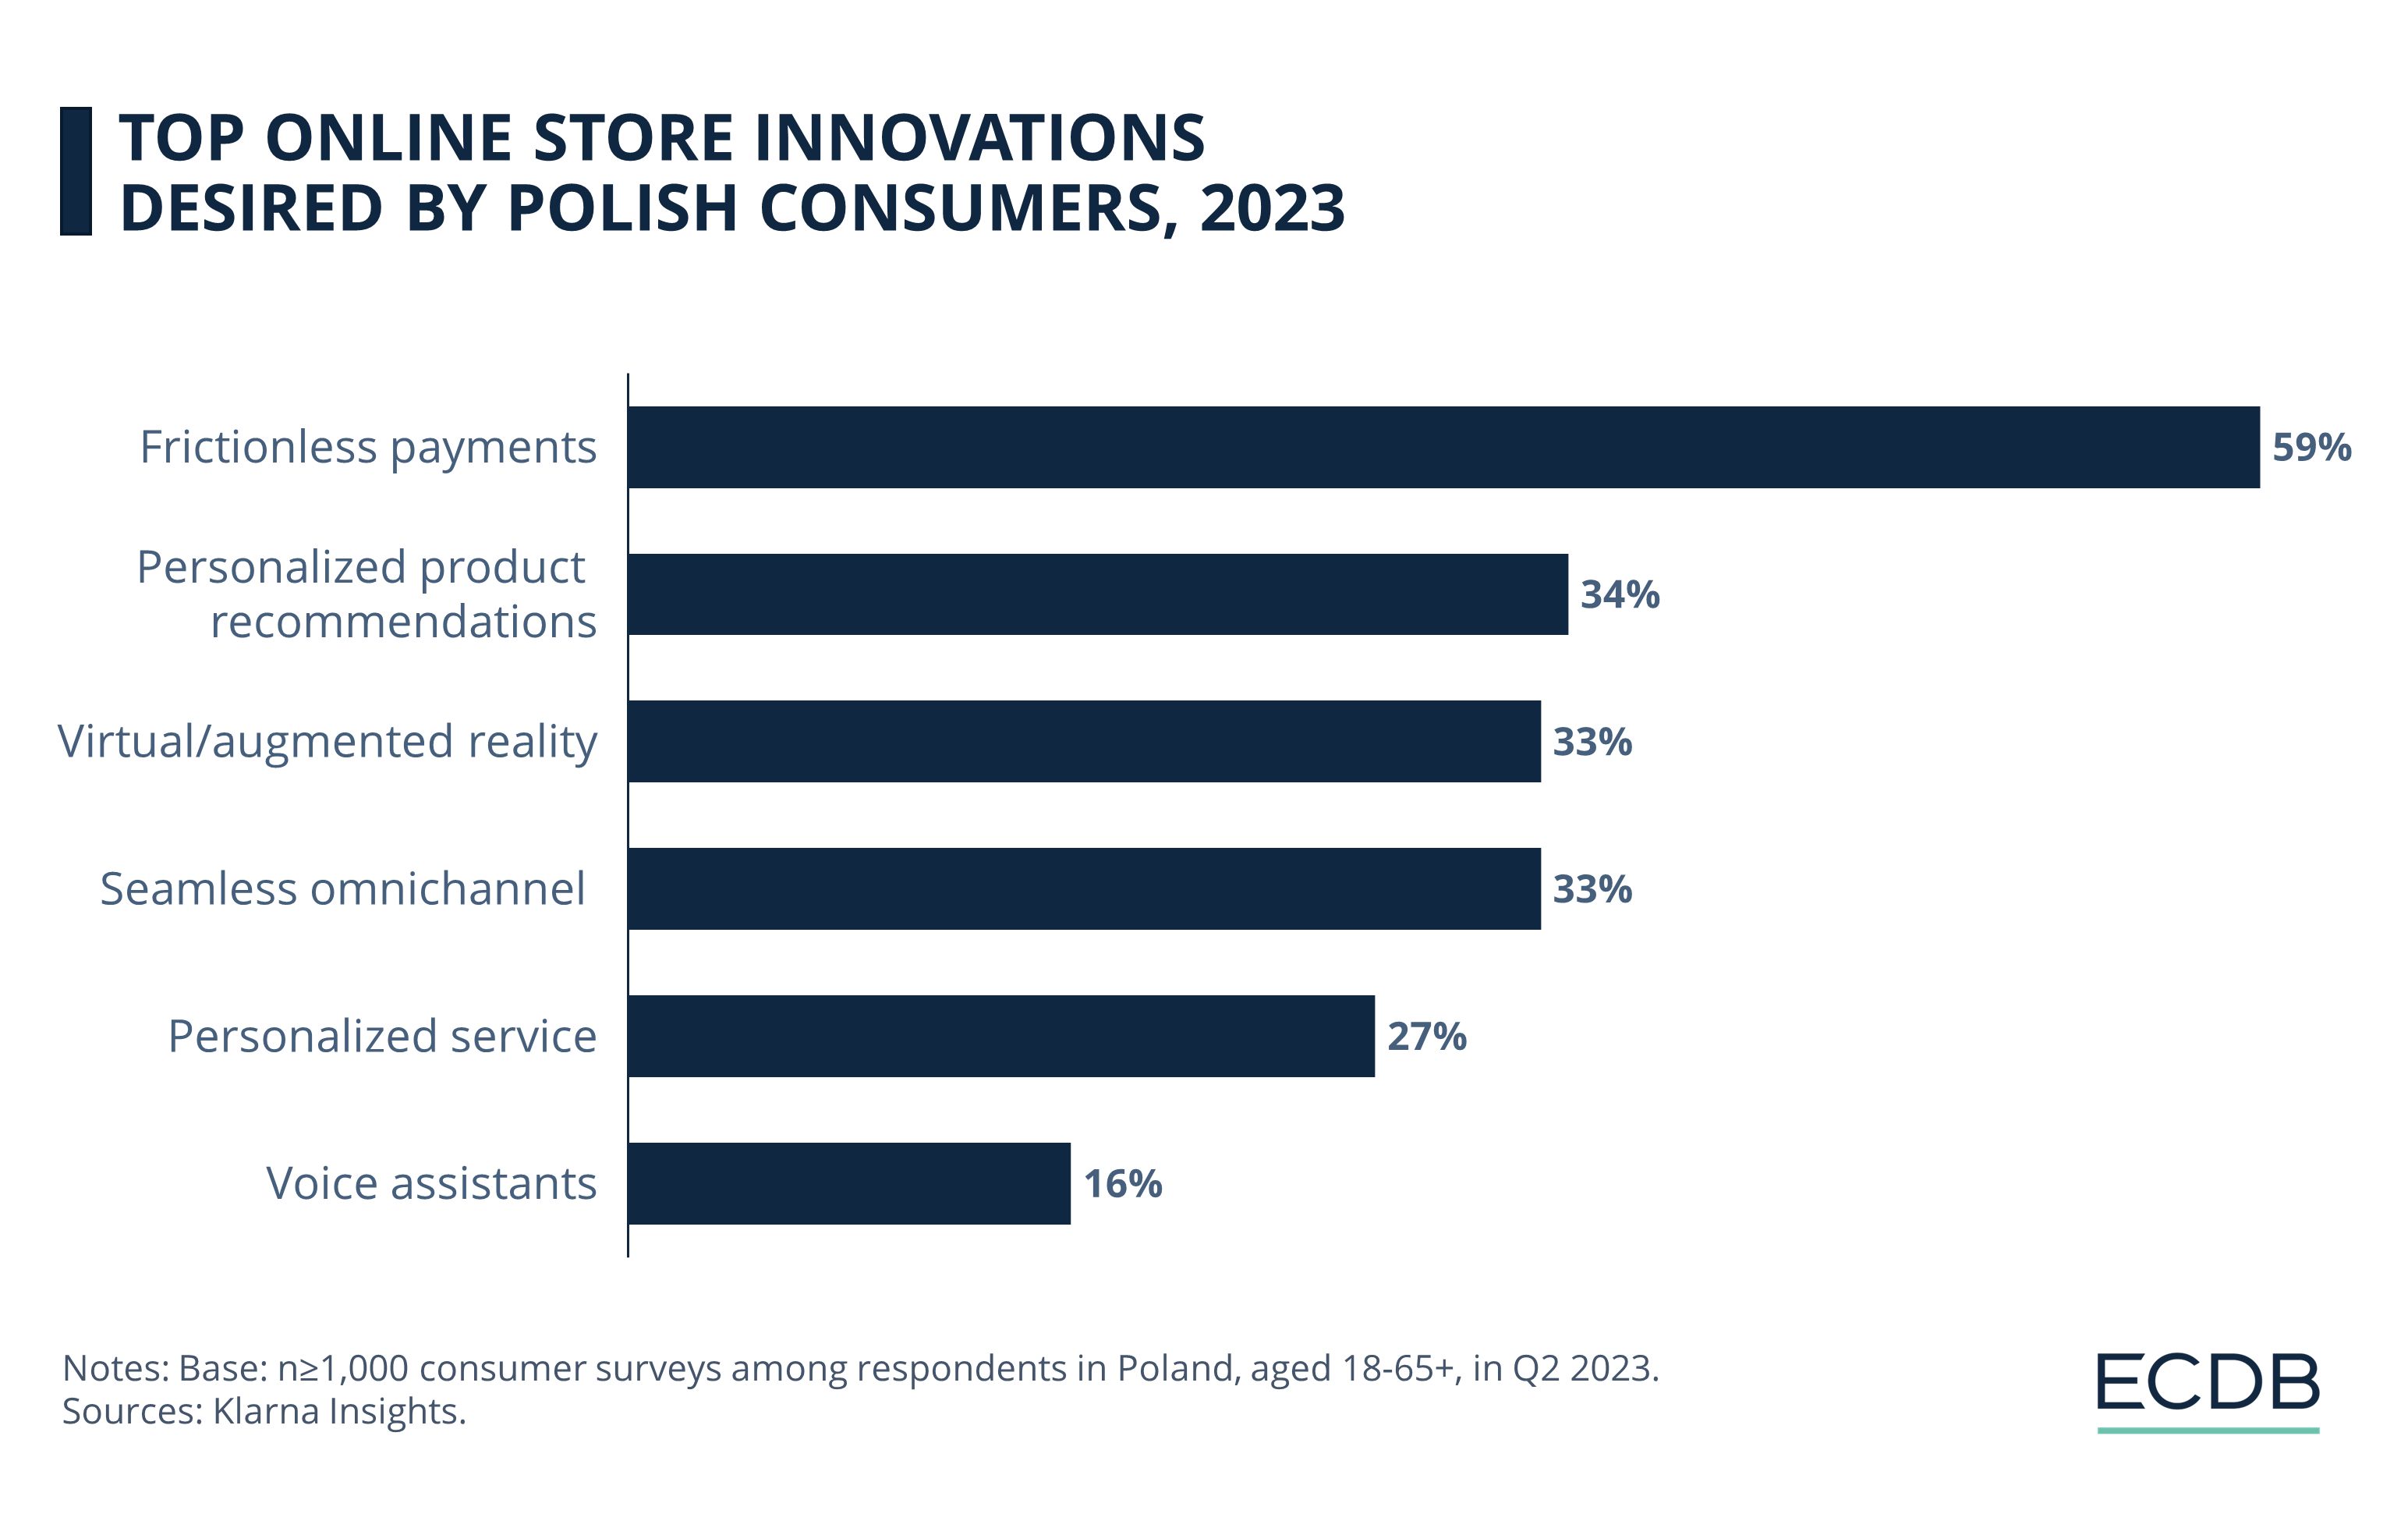 Poles' Most Wanted Innovations in Online Shopping 2022